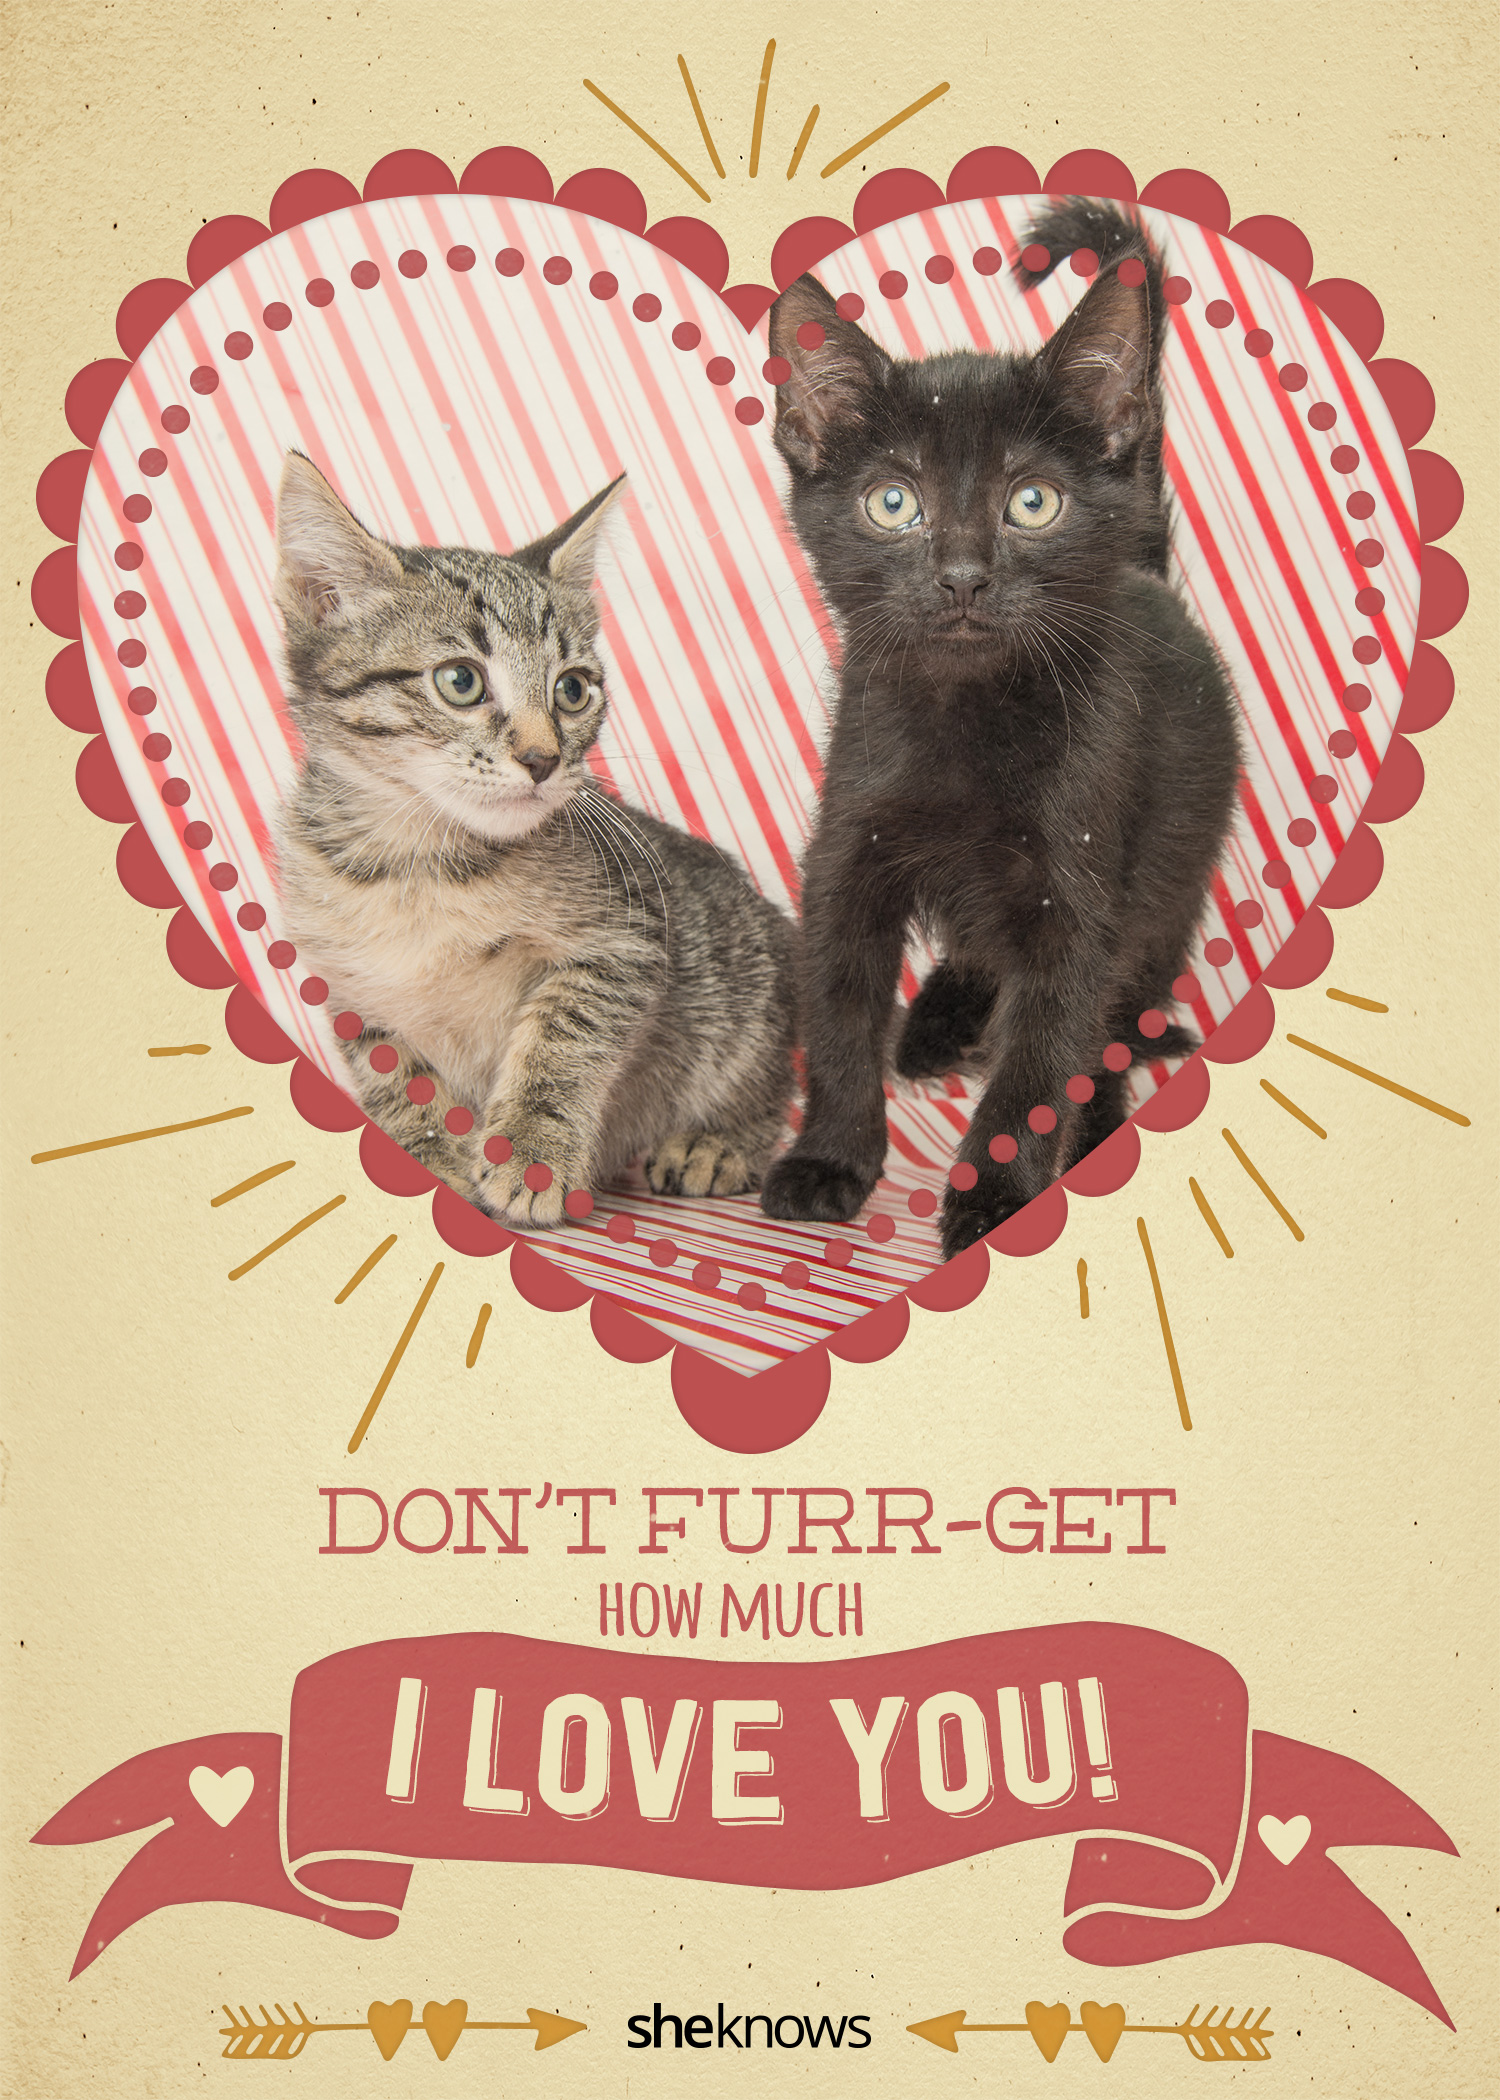 12 Kitty-cat Valentine's Day cards that will make you aww